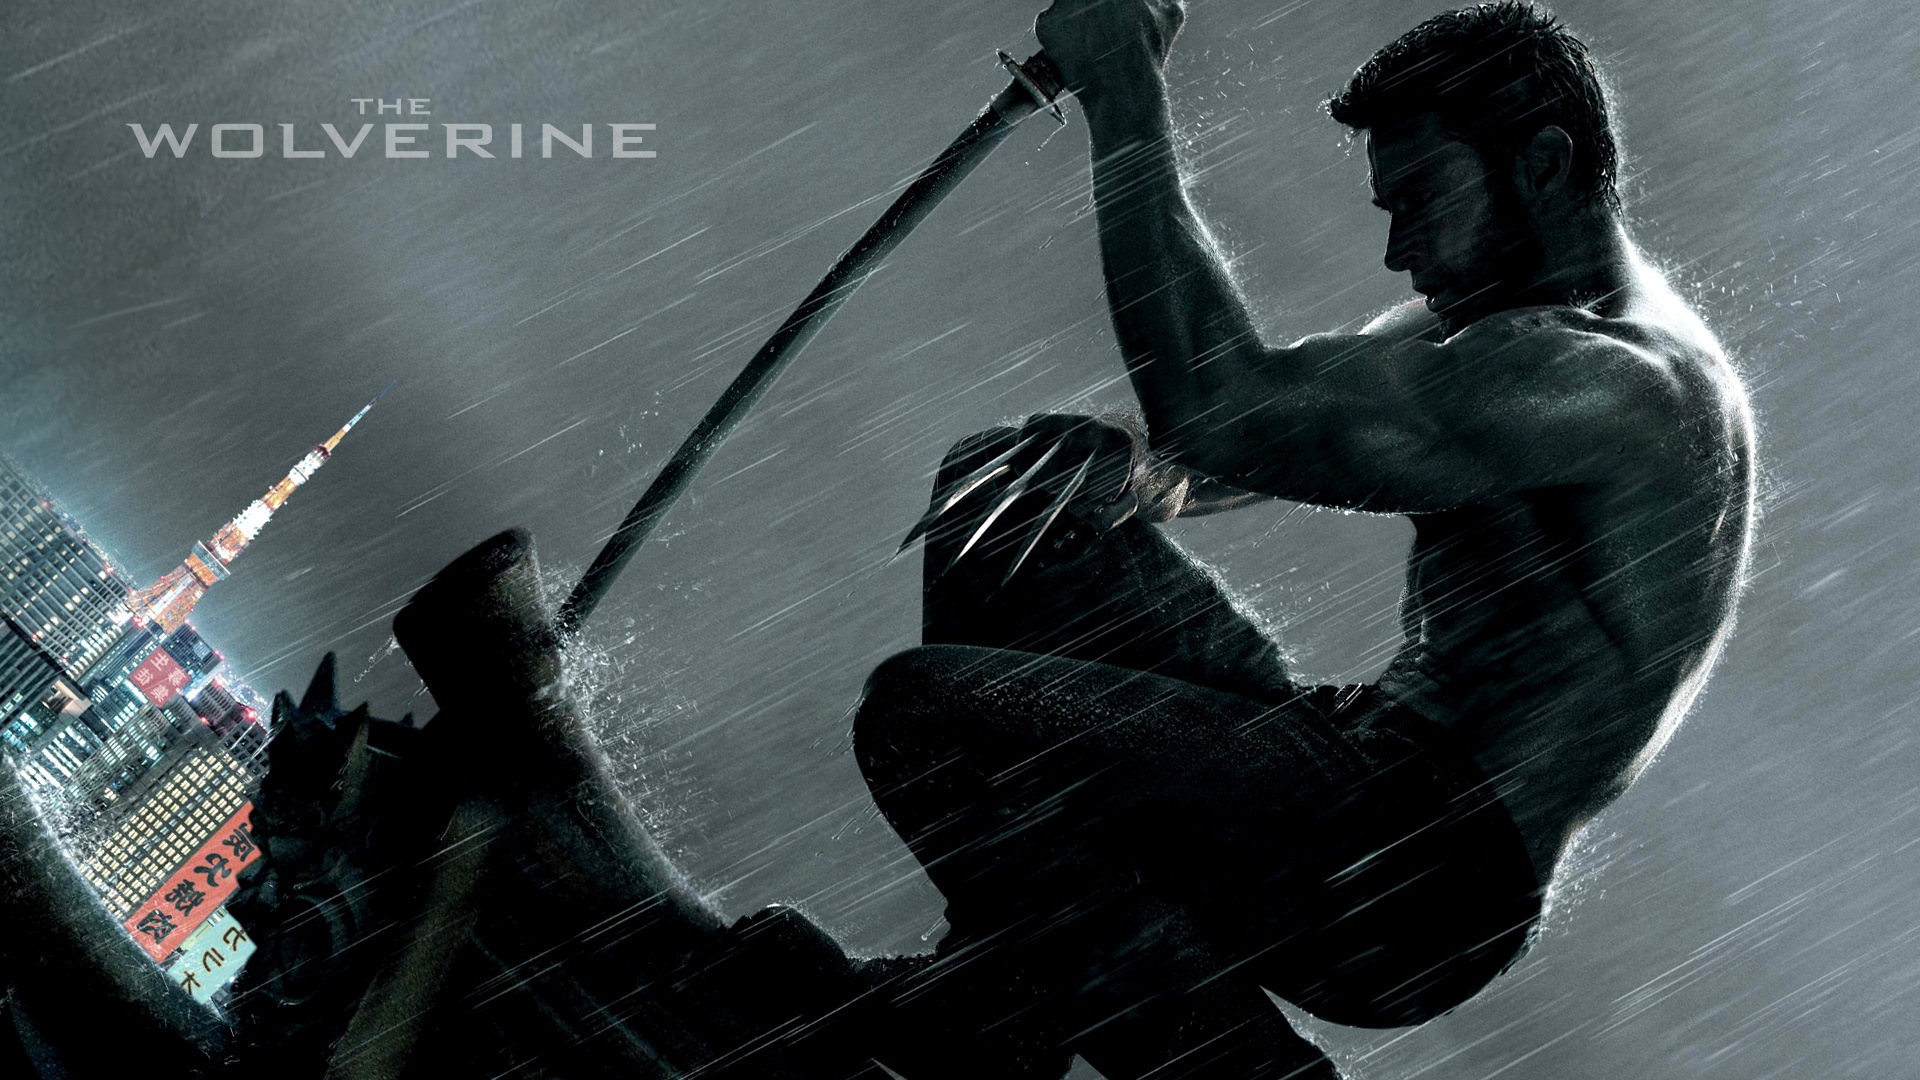 The Wolverine 2013 HD wallpapers #8 - 1920x1080